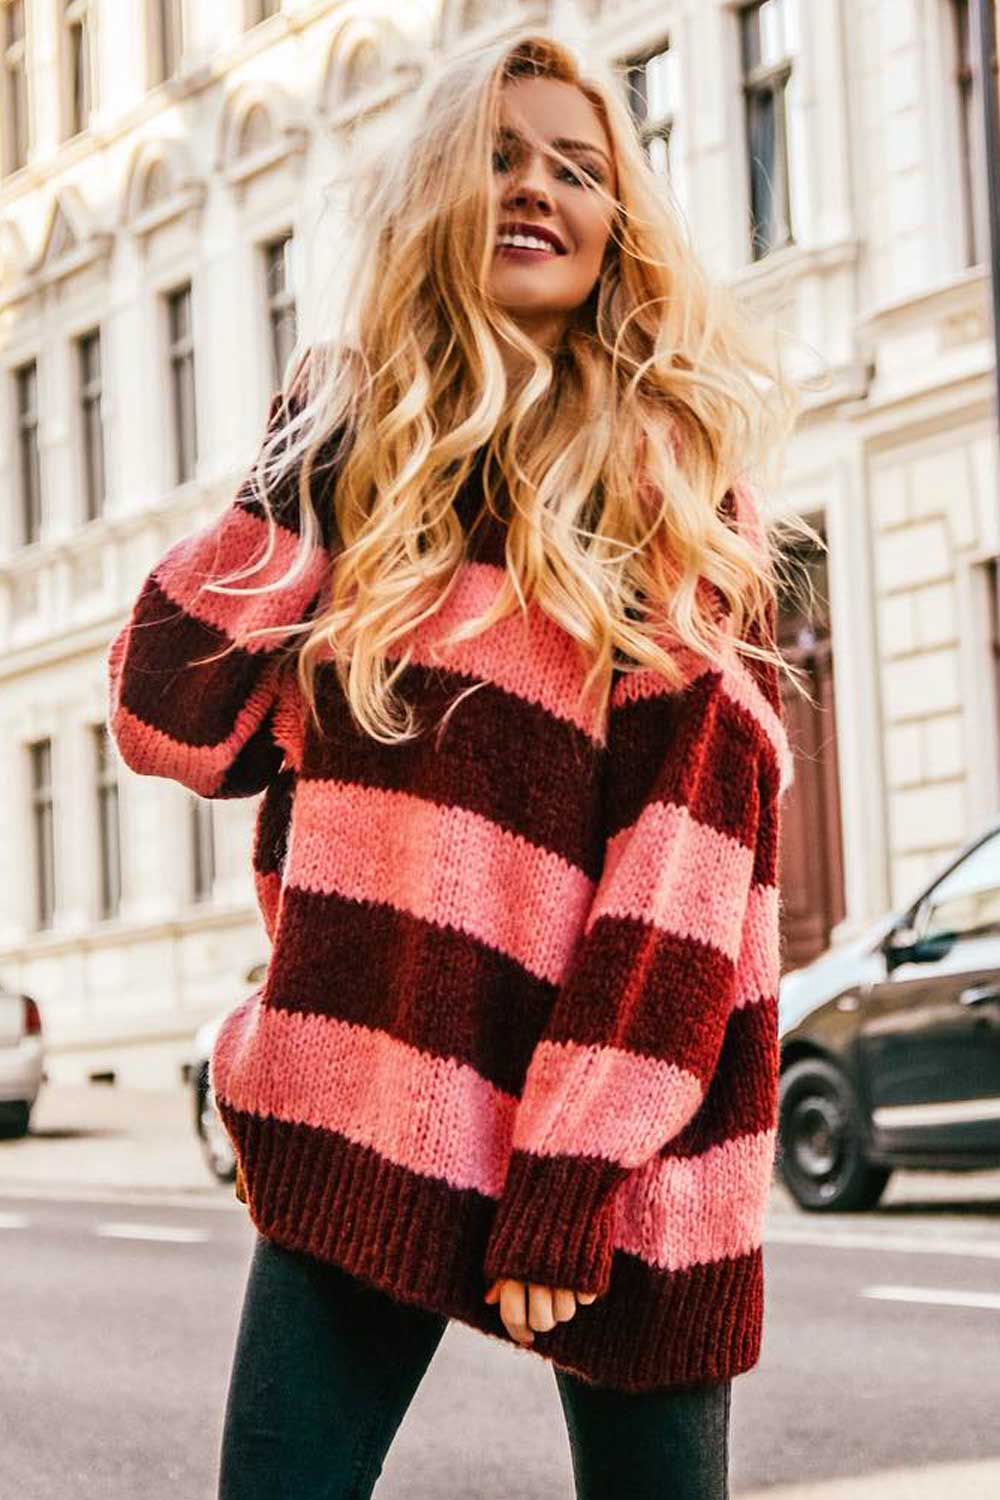 Oversized Sweater Outfit Ideas